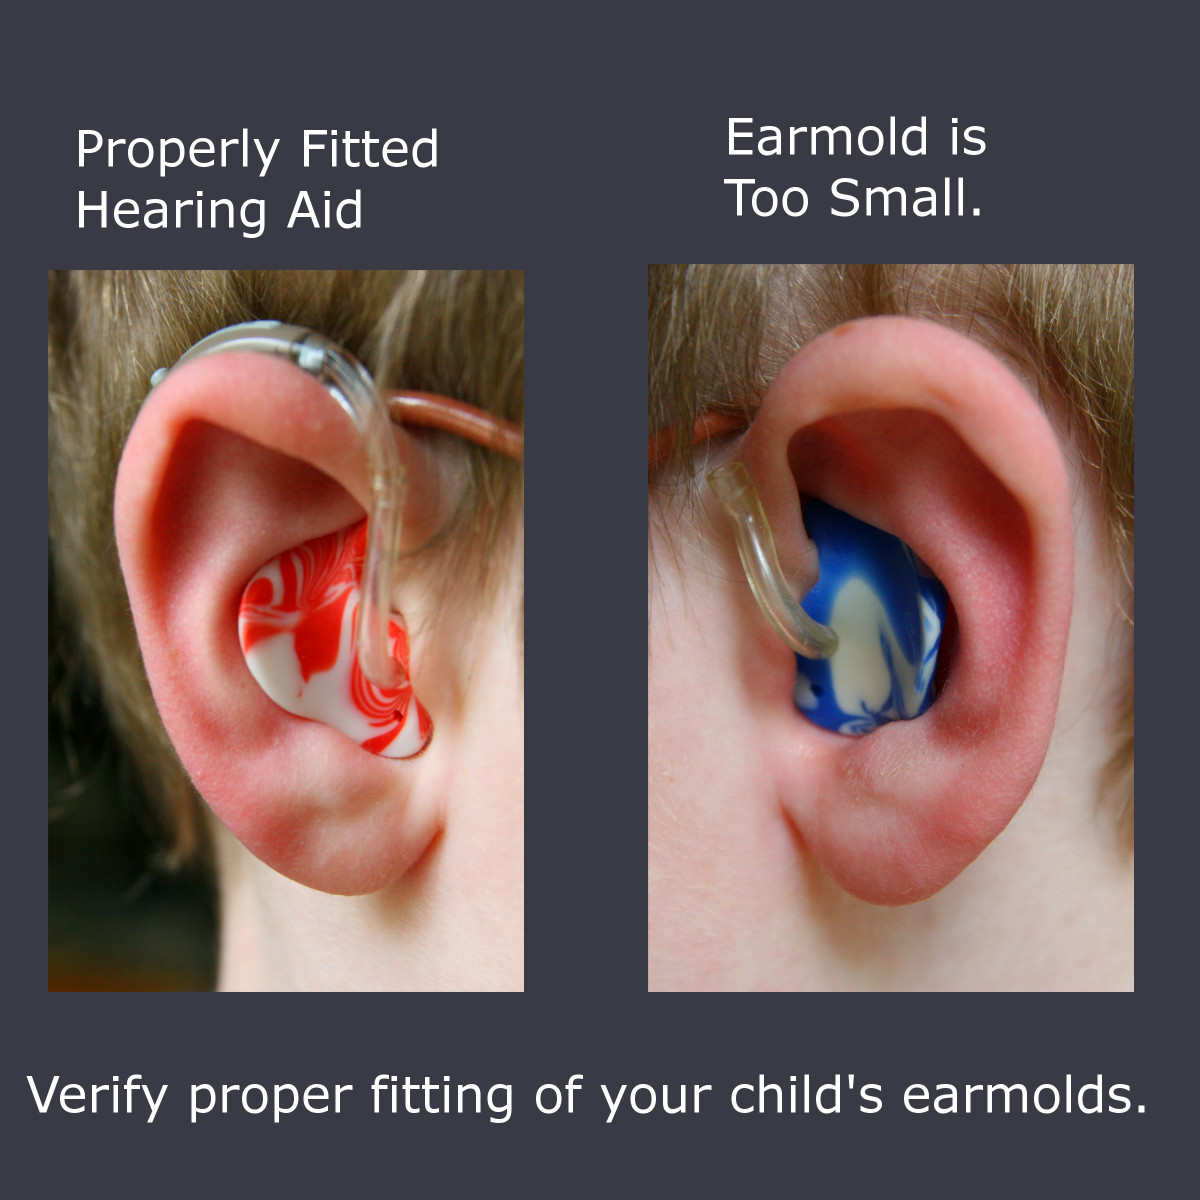 Make sure your child's hearing aids fit properly. The earmold on the left is properly fitted - the one on the right is too small and leaves a gap.